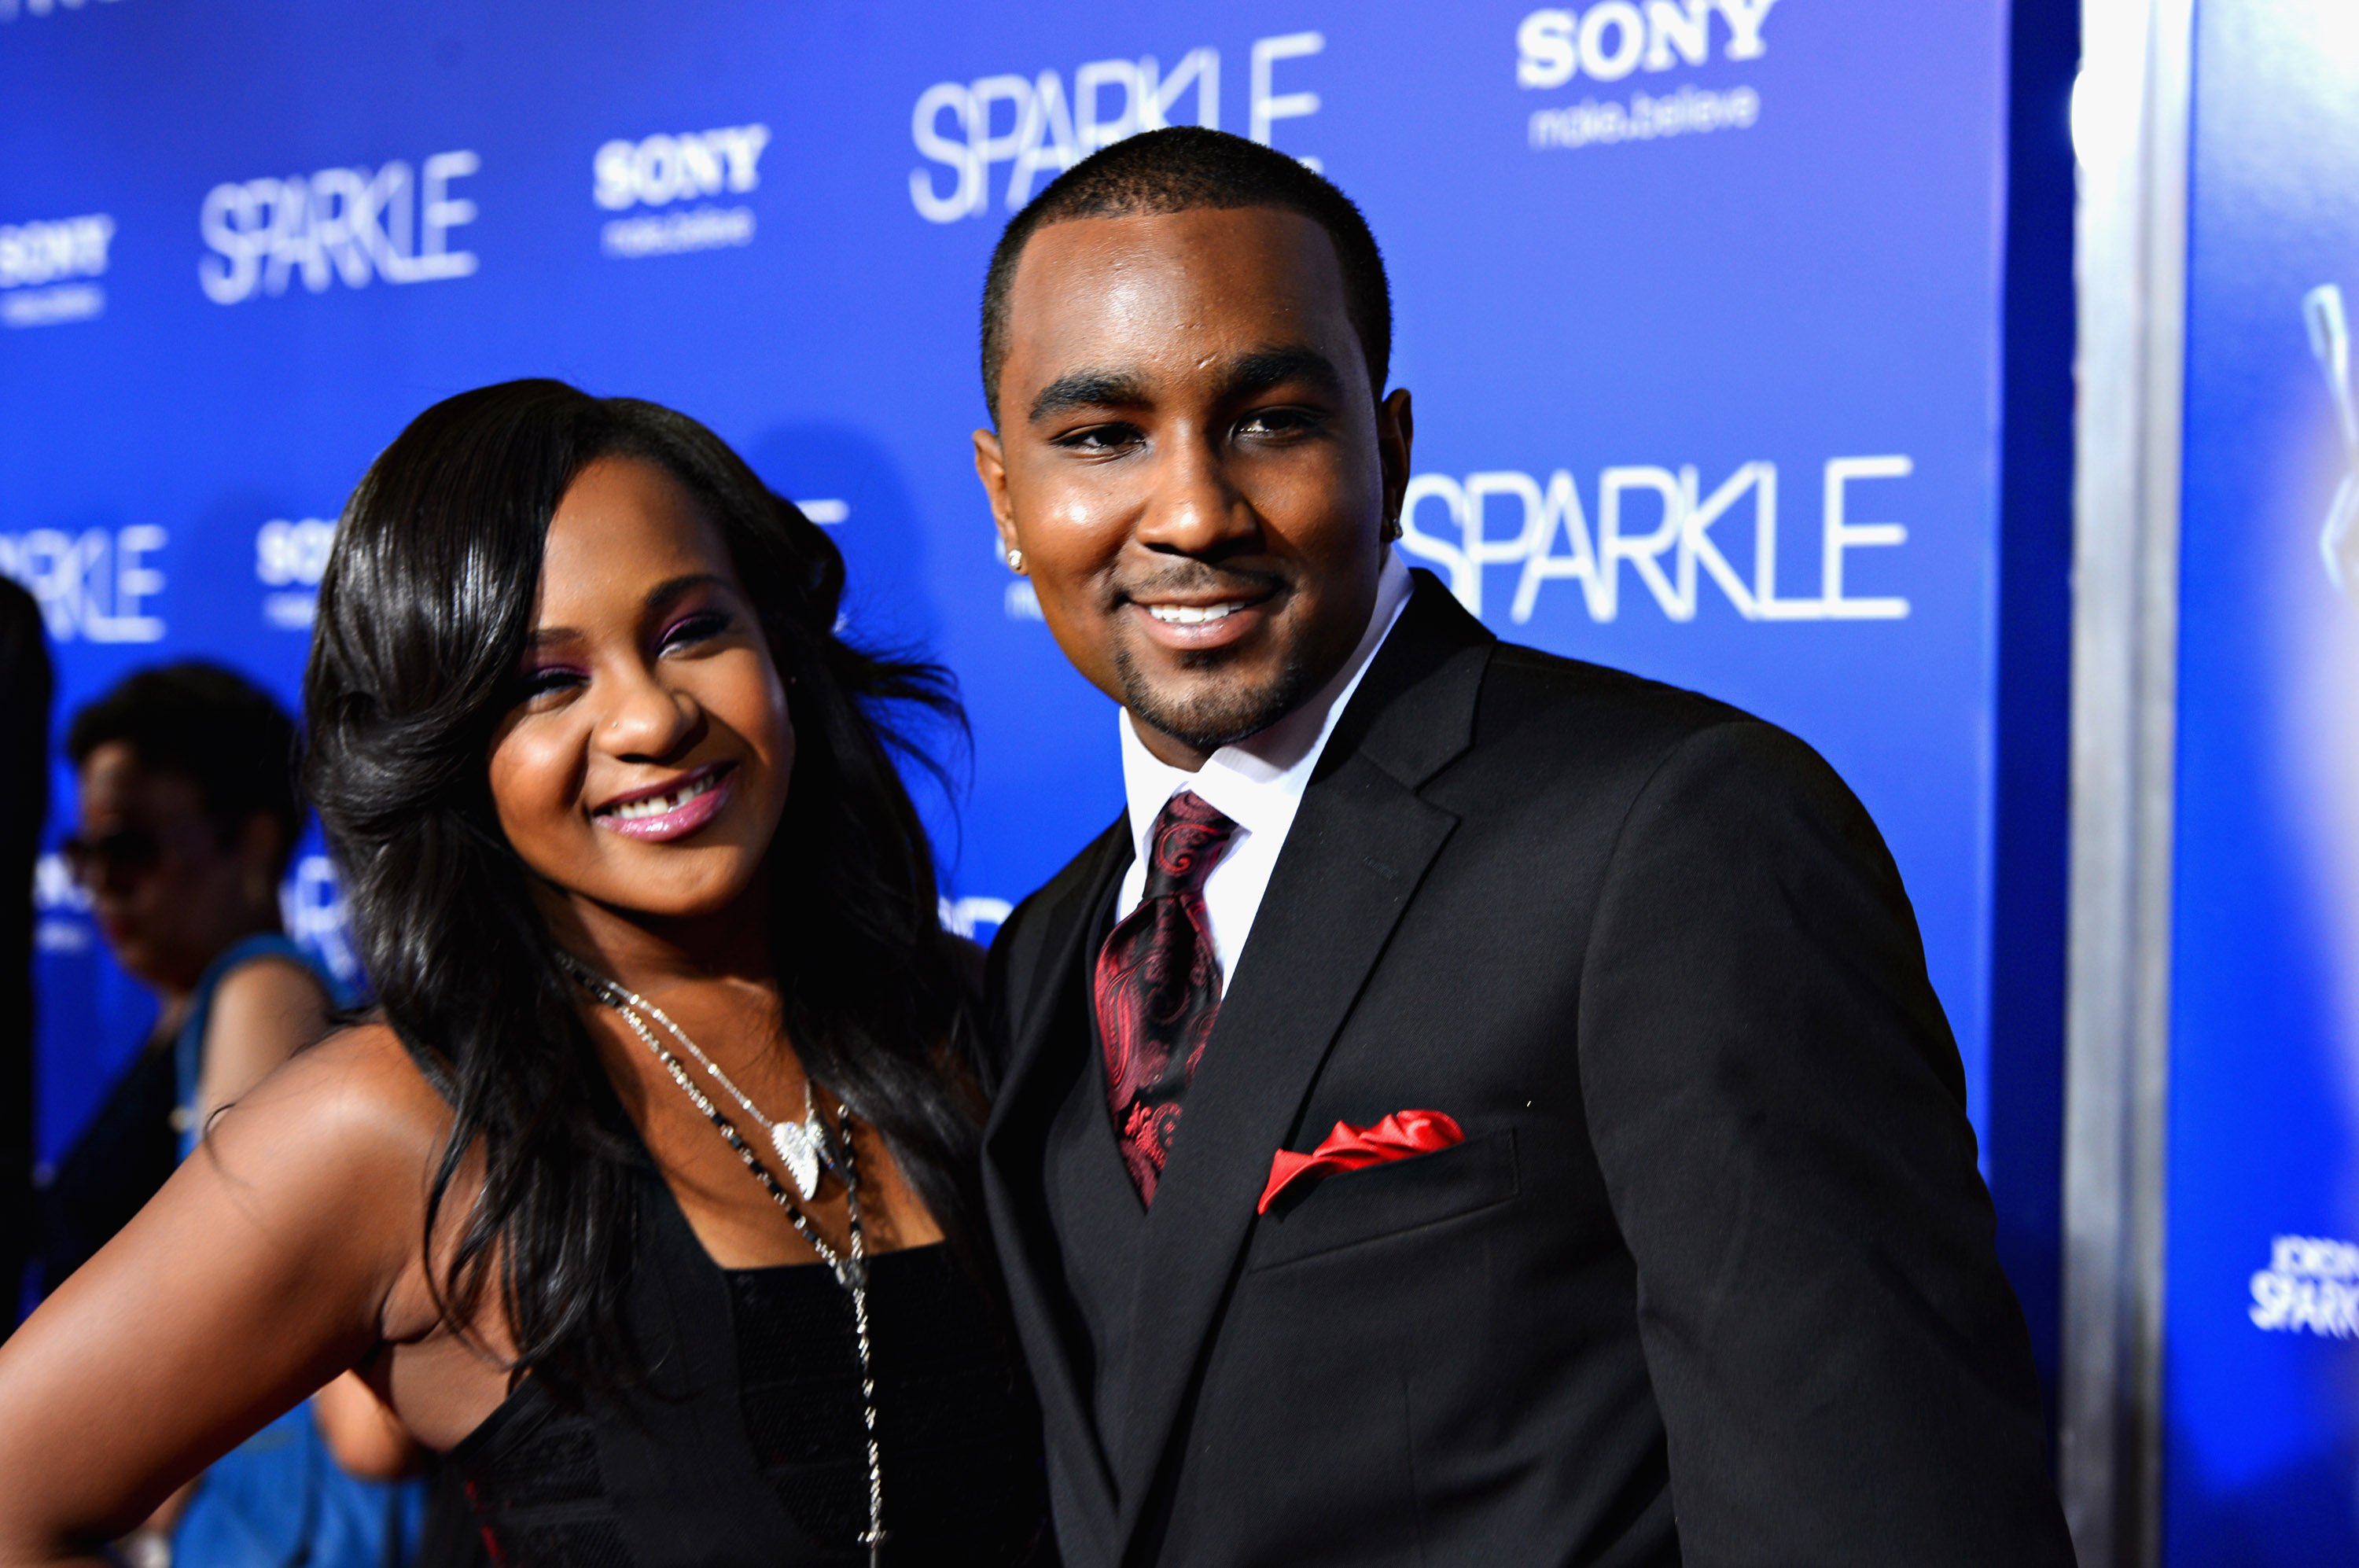 Bobbi Kristina Brown and Nick Gordon arrive at Tri-Star Pictures' "Sparkle" premiere at Grauman's Chinese Theatre on August 16, 2012 | Photo: GettyImages